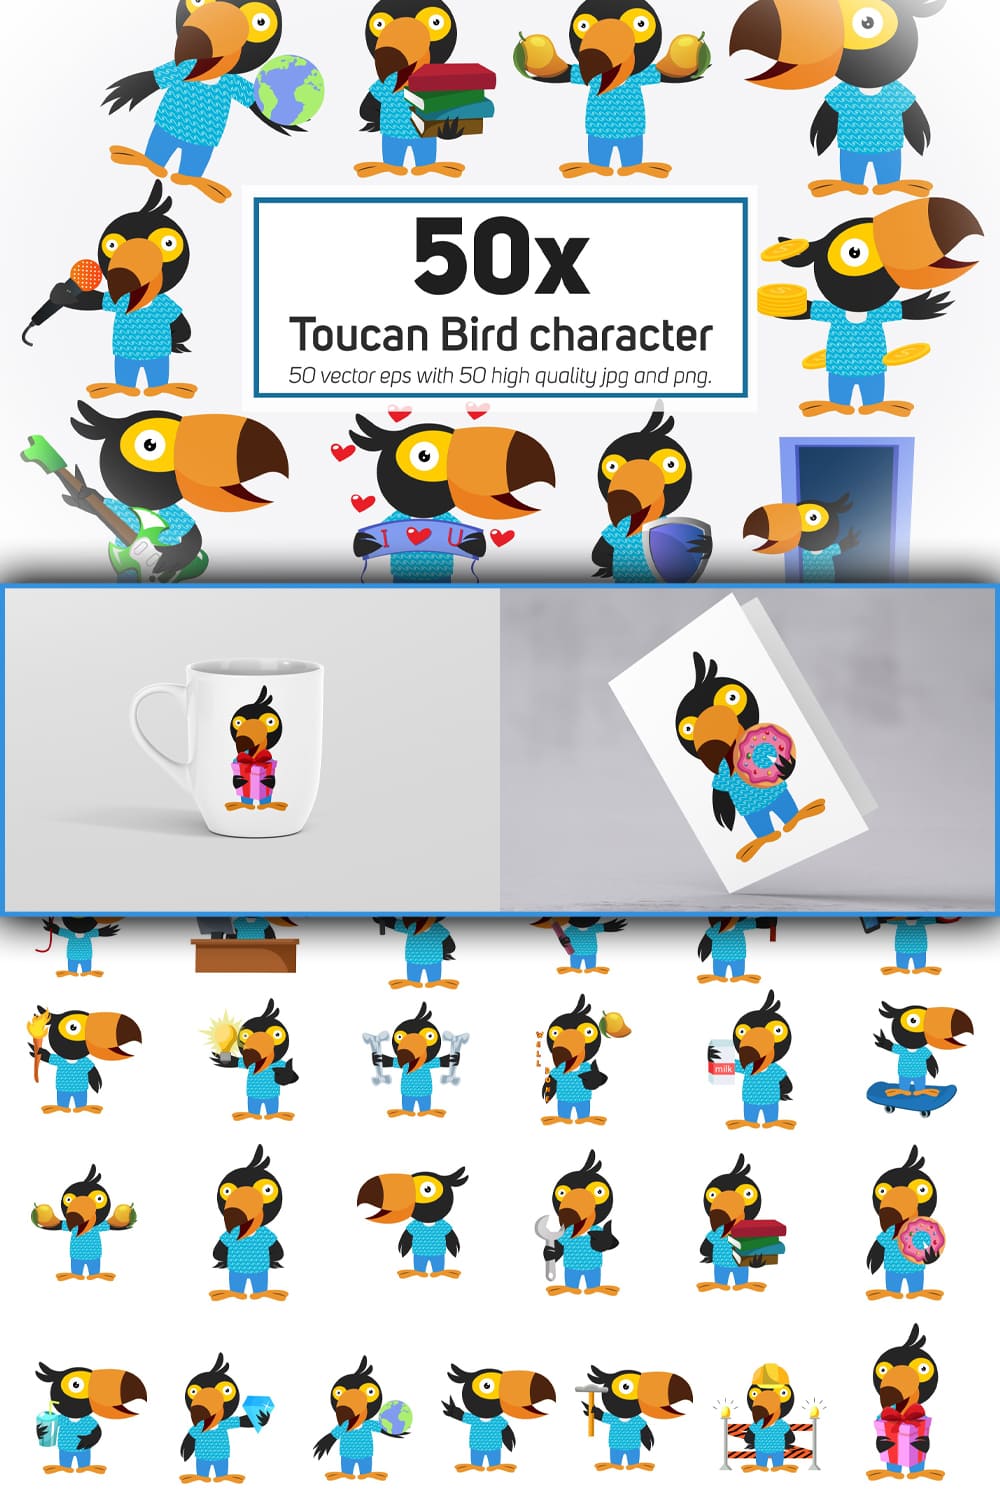 Toucan bird character or sticker collection of pinterest.